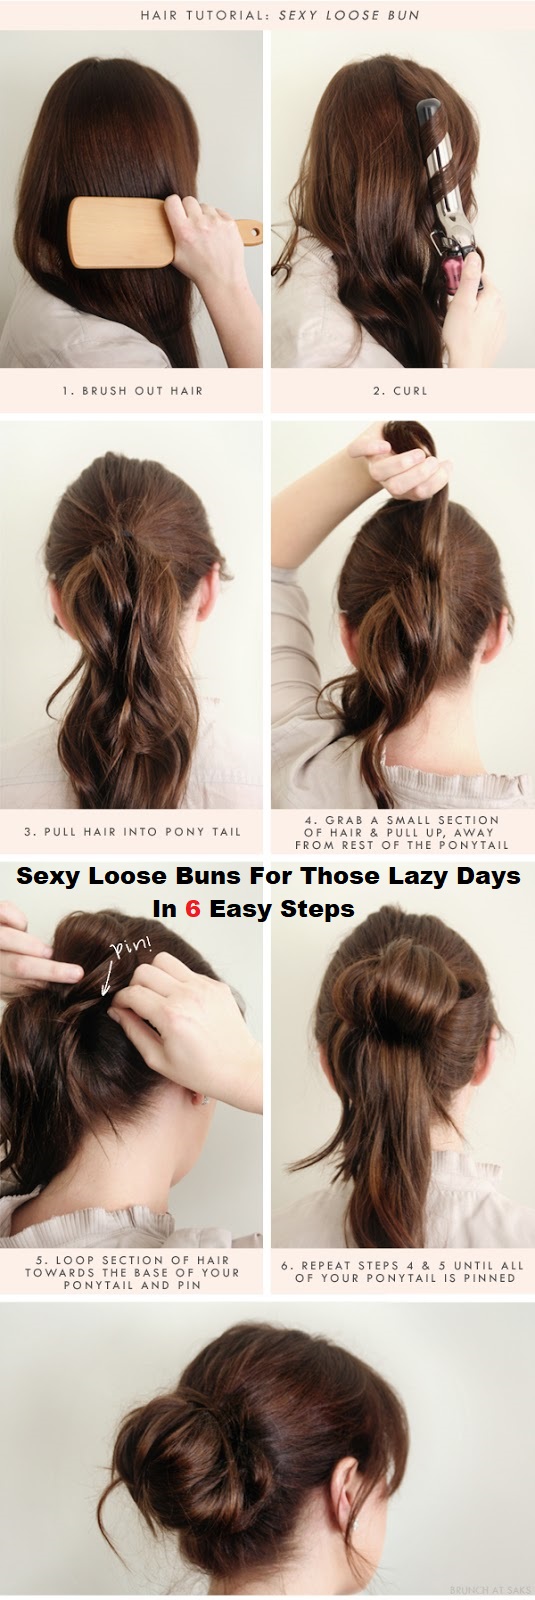 Sexy Loose Buns For Those Lazy Days